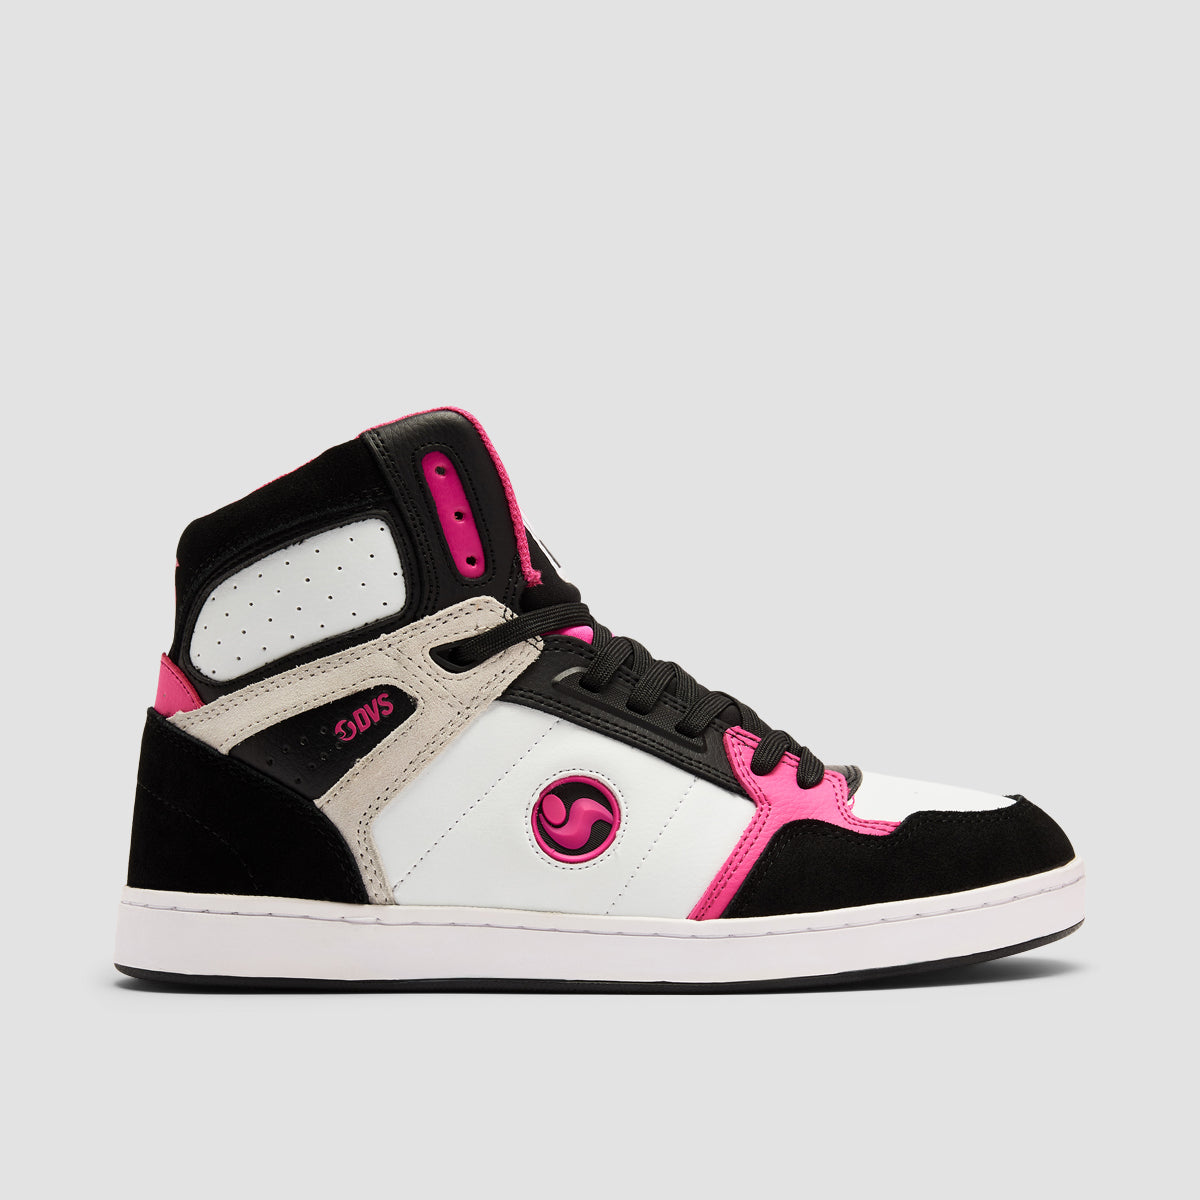 DVS Honcho High Top Shoes - Black/White/Pink Suede - Womens